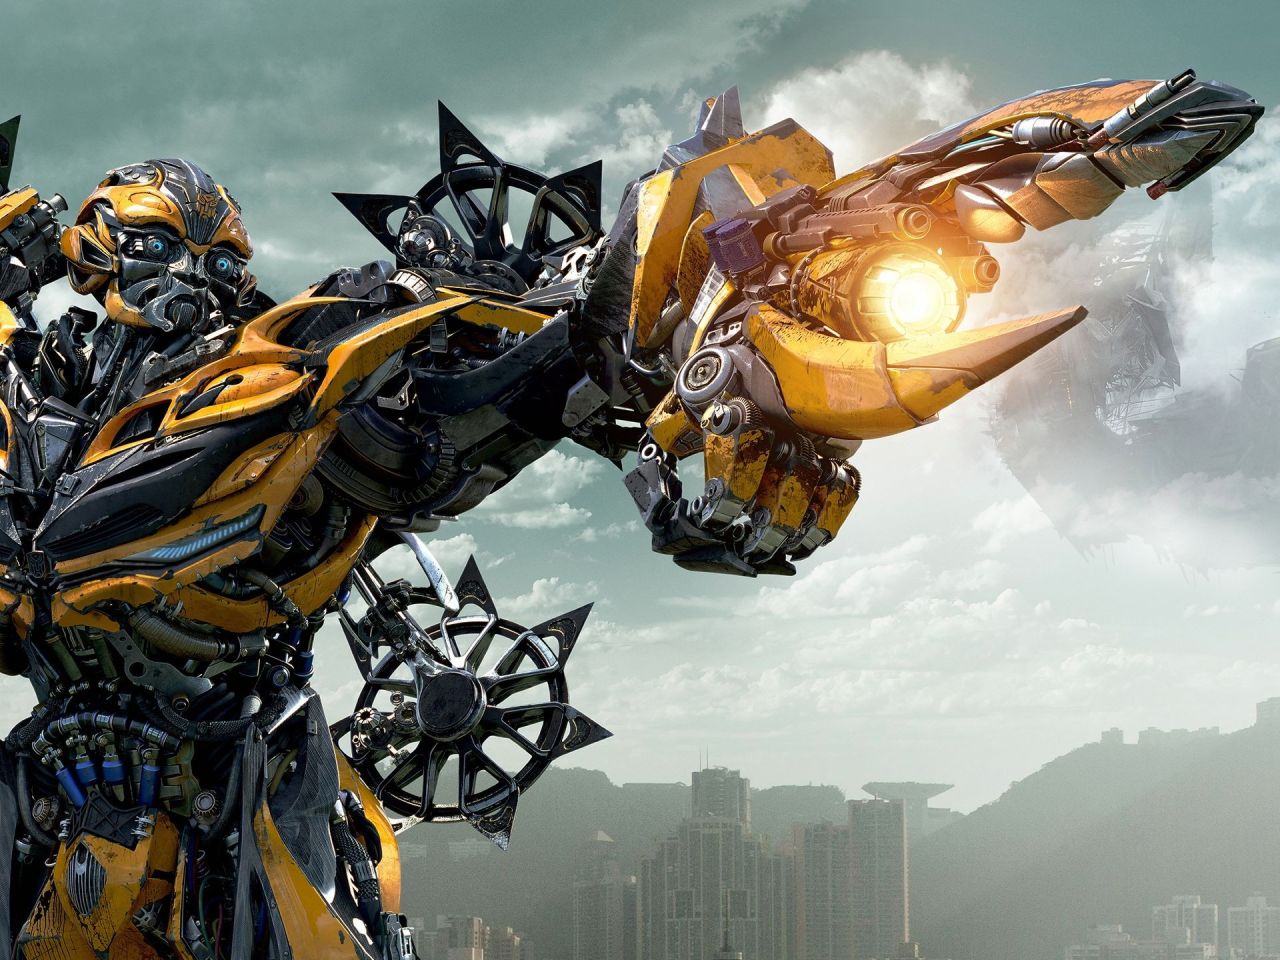 <strong>"Transformers: Age of Extinction"</strong> was scorched by critics -- 18% on the Tomatometer -- and had the poorest domestic showing ($244 million) of any "Transformers" film. But director Michael Bay is still laughing all the way to the bank: The film has made $821 million overseas and <a href="http://www.cnn.com/2014/07/08/showbiz/movies/transformers-china-box-office-ew/">set a record in China</a>.